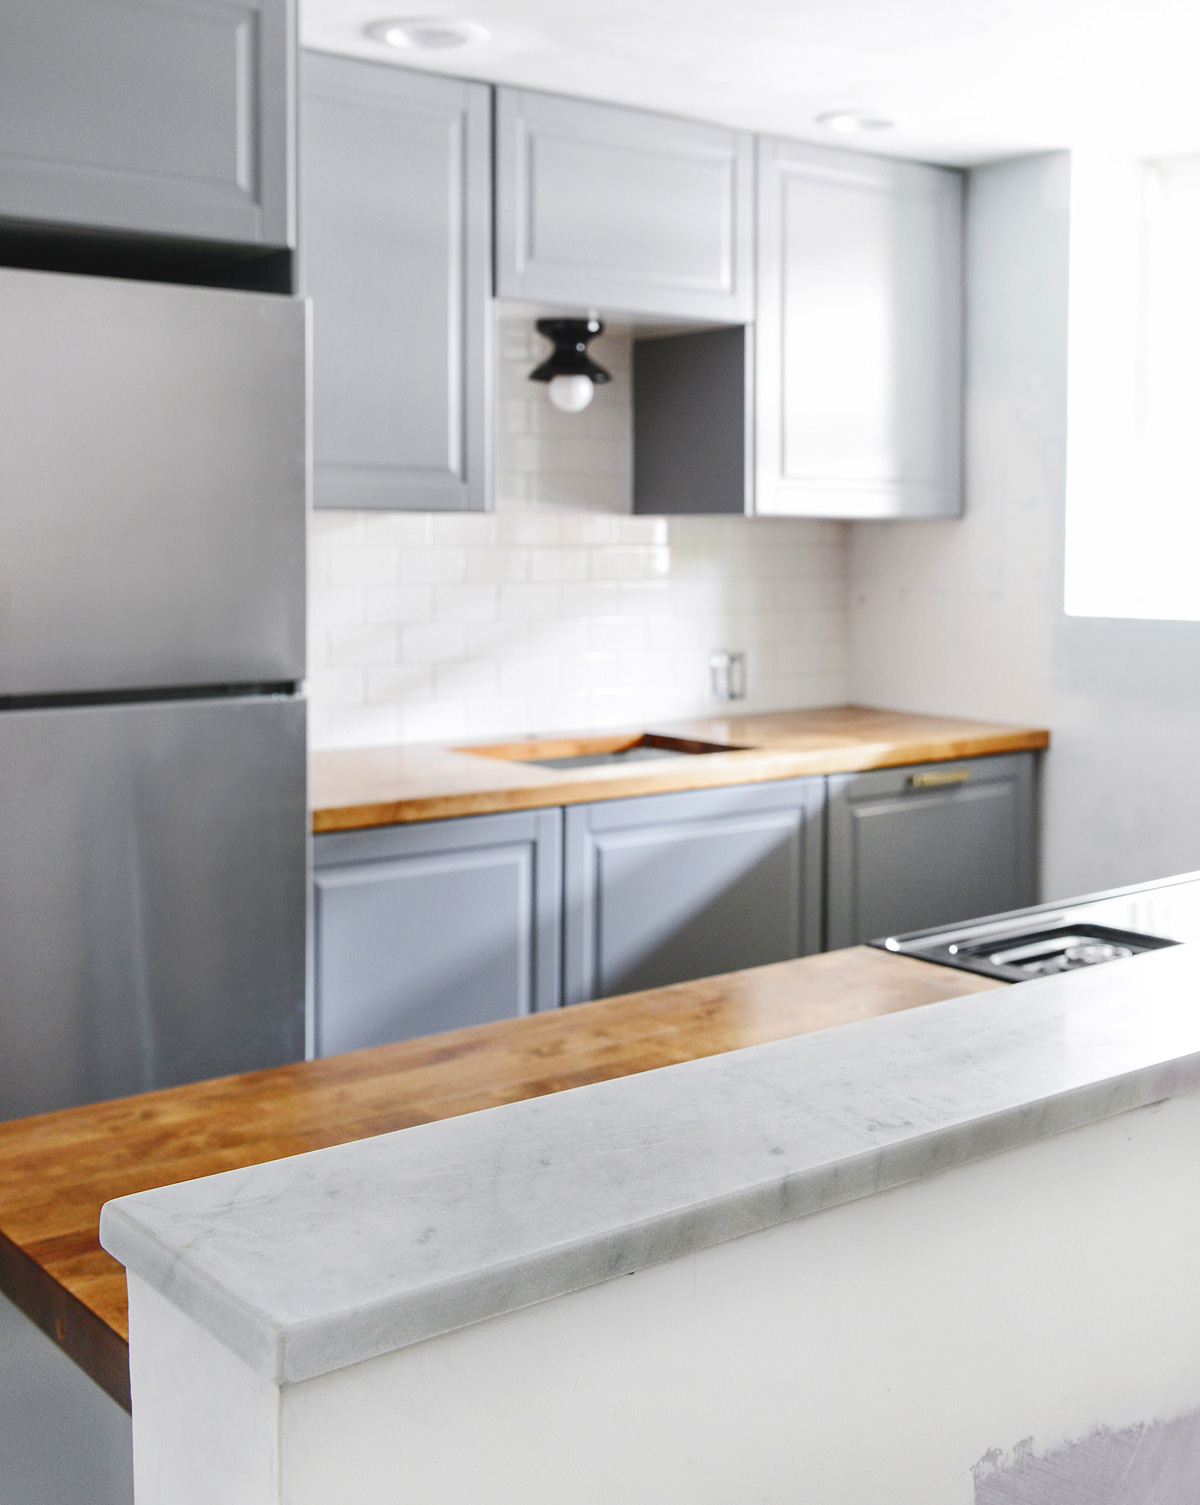 How We Polished A Mini Marble Countertop for the Garden Kitchen!